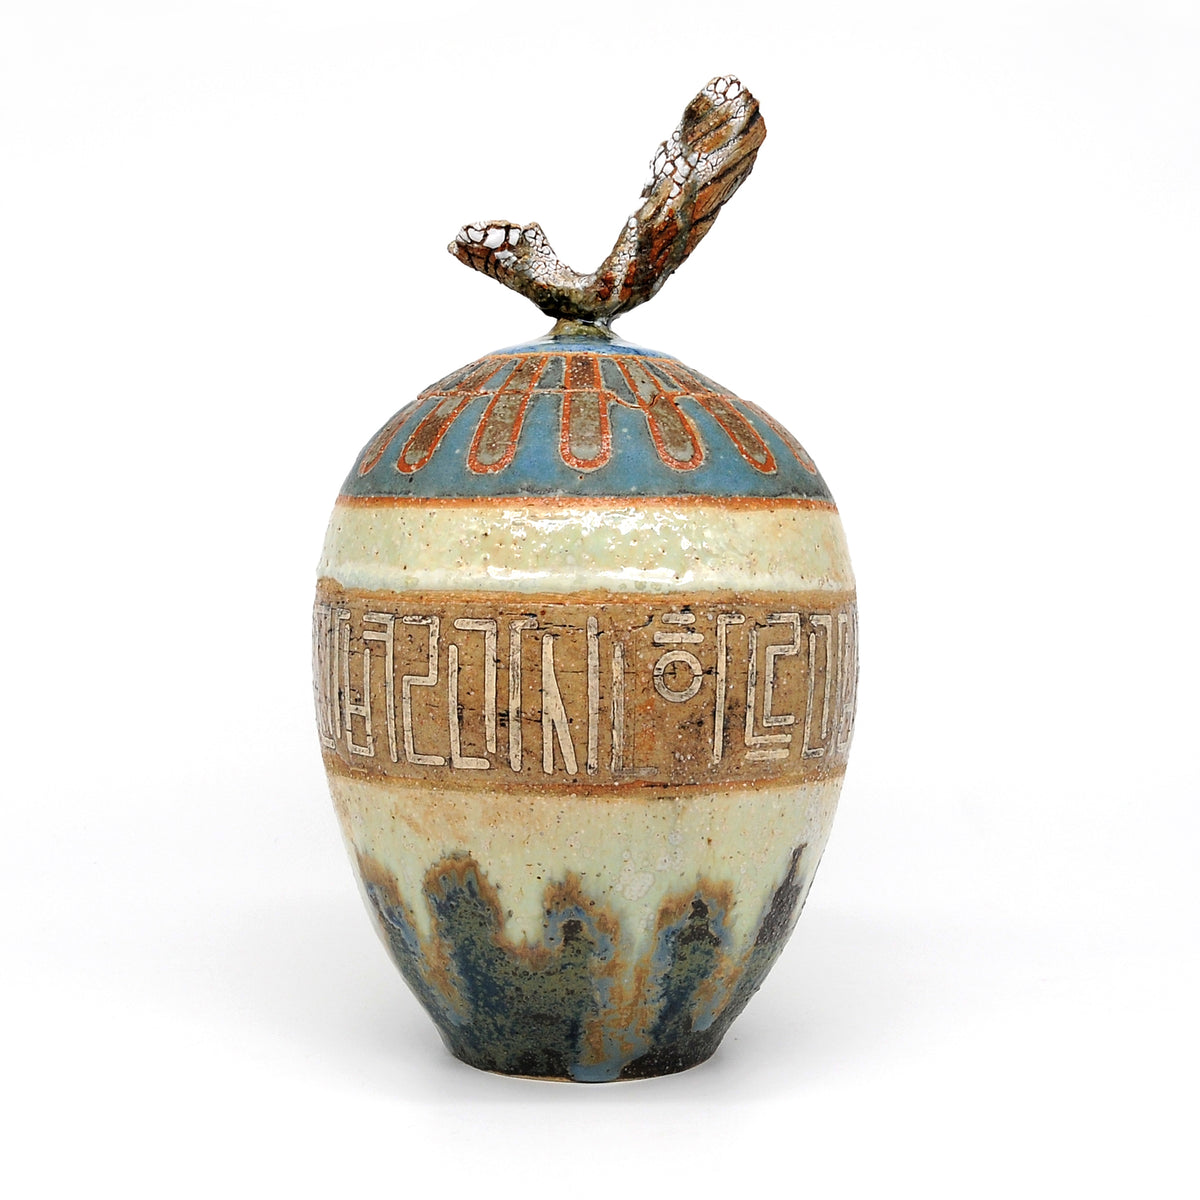 &#39;MK17 Large Lava Jar’ by Miae Kim ceramics, available at Padstow Gallery, Cornwall